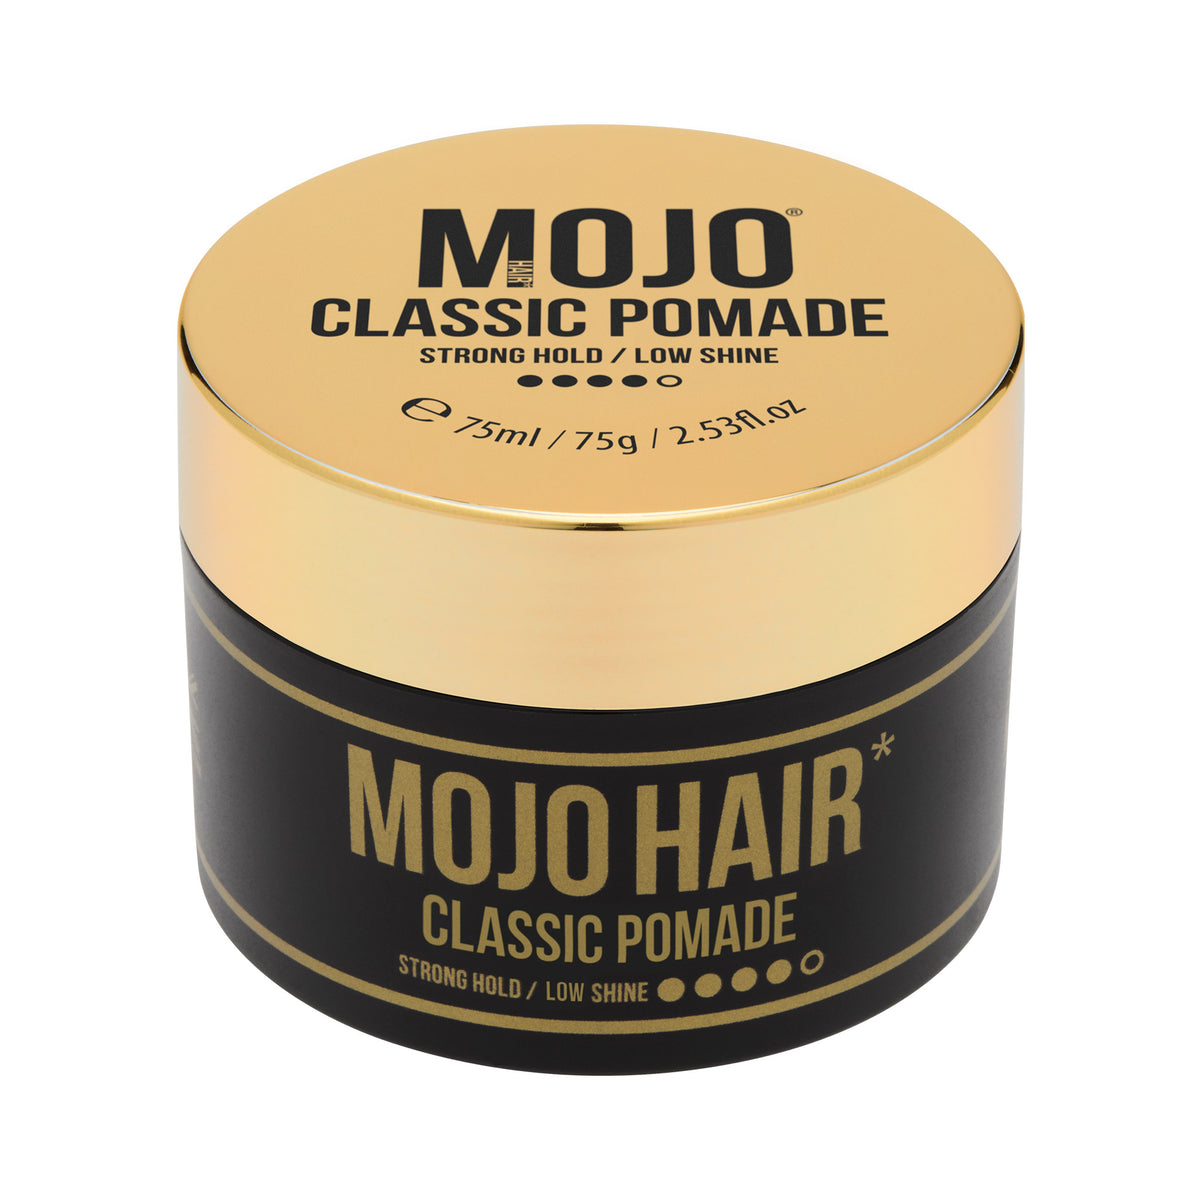 Mojo Hair Classic Pomade Strong Hold /Low Shine water based pomade features luxury fragrance Washes out with ease great hairstyling product for men and women  (75ml / 75g / 2.53fl.oz) 